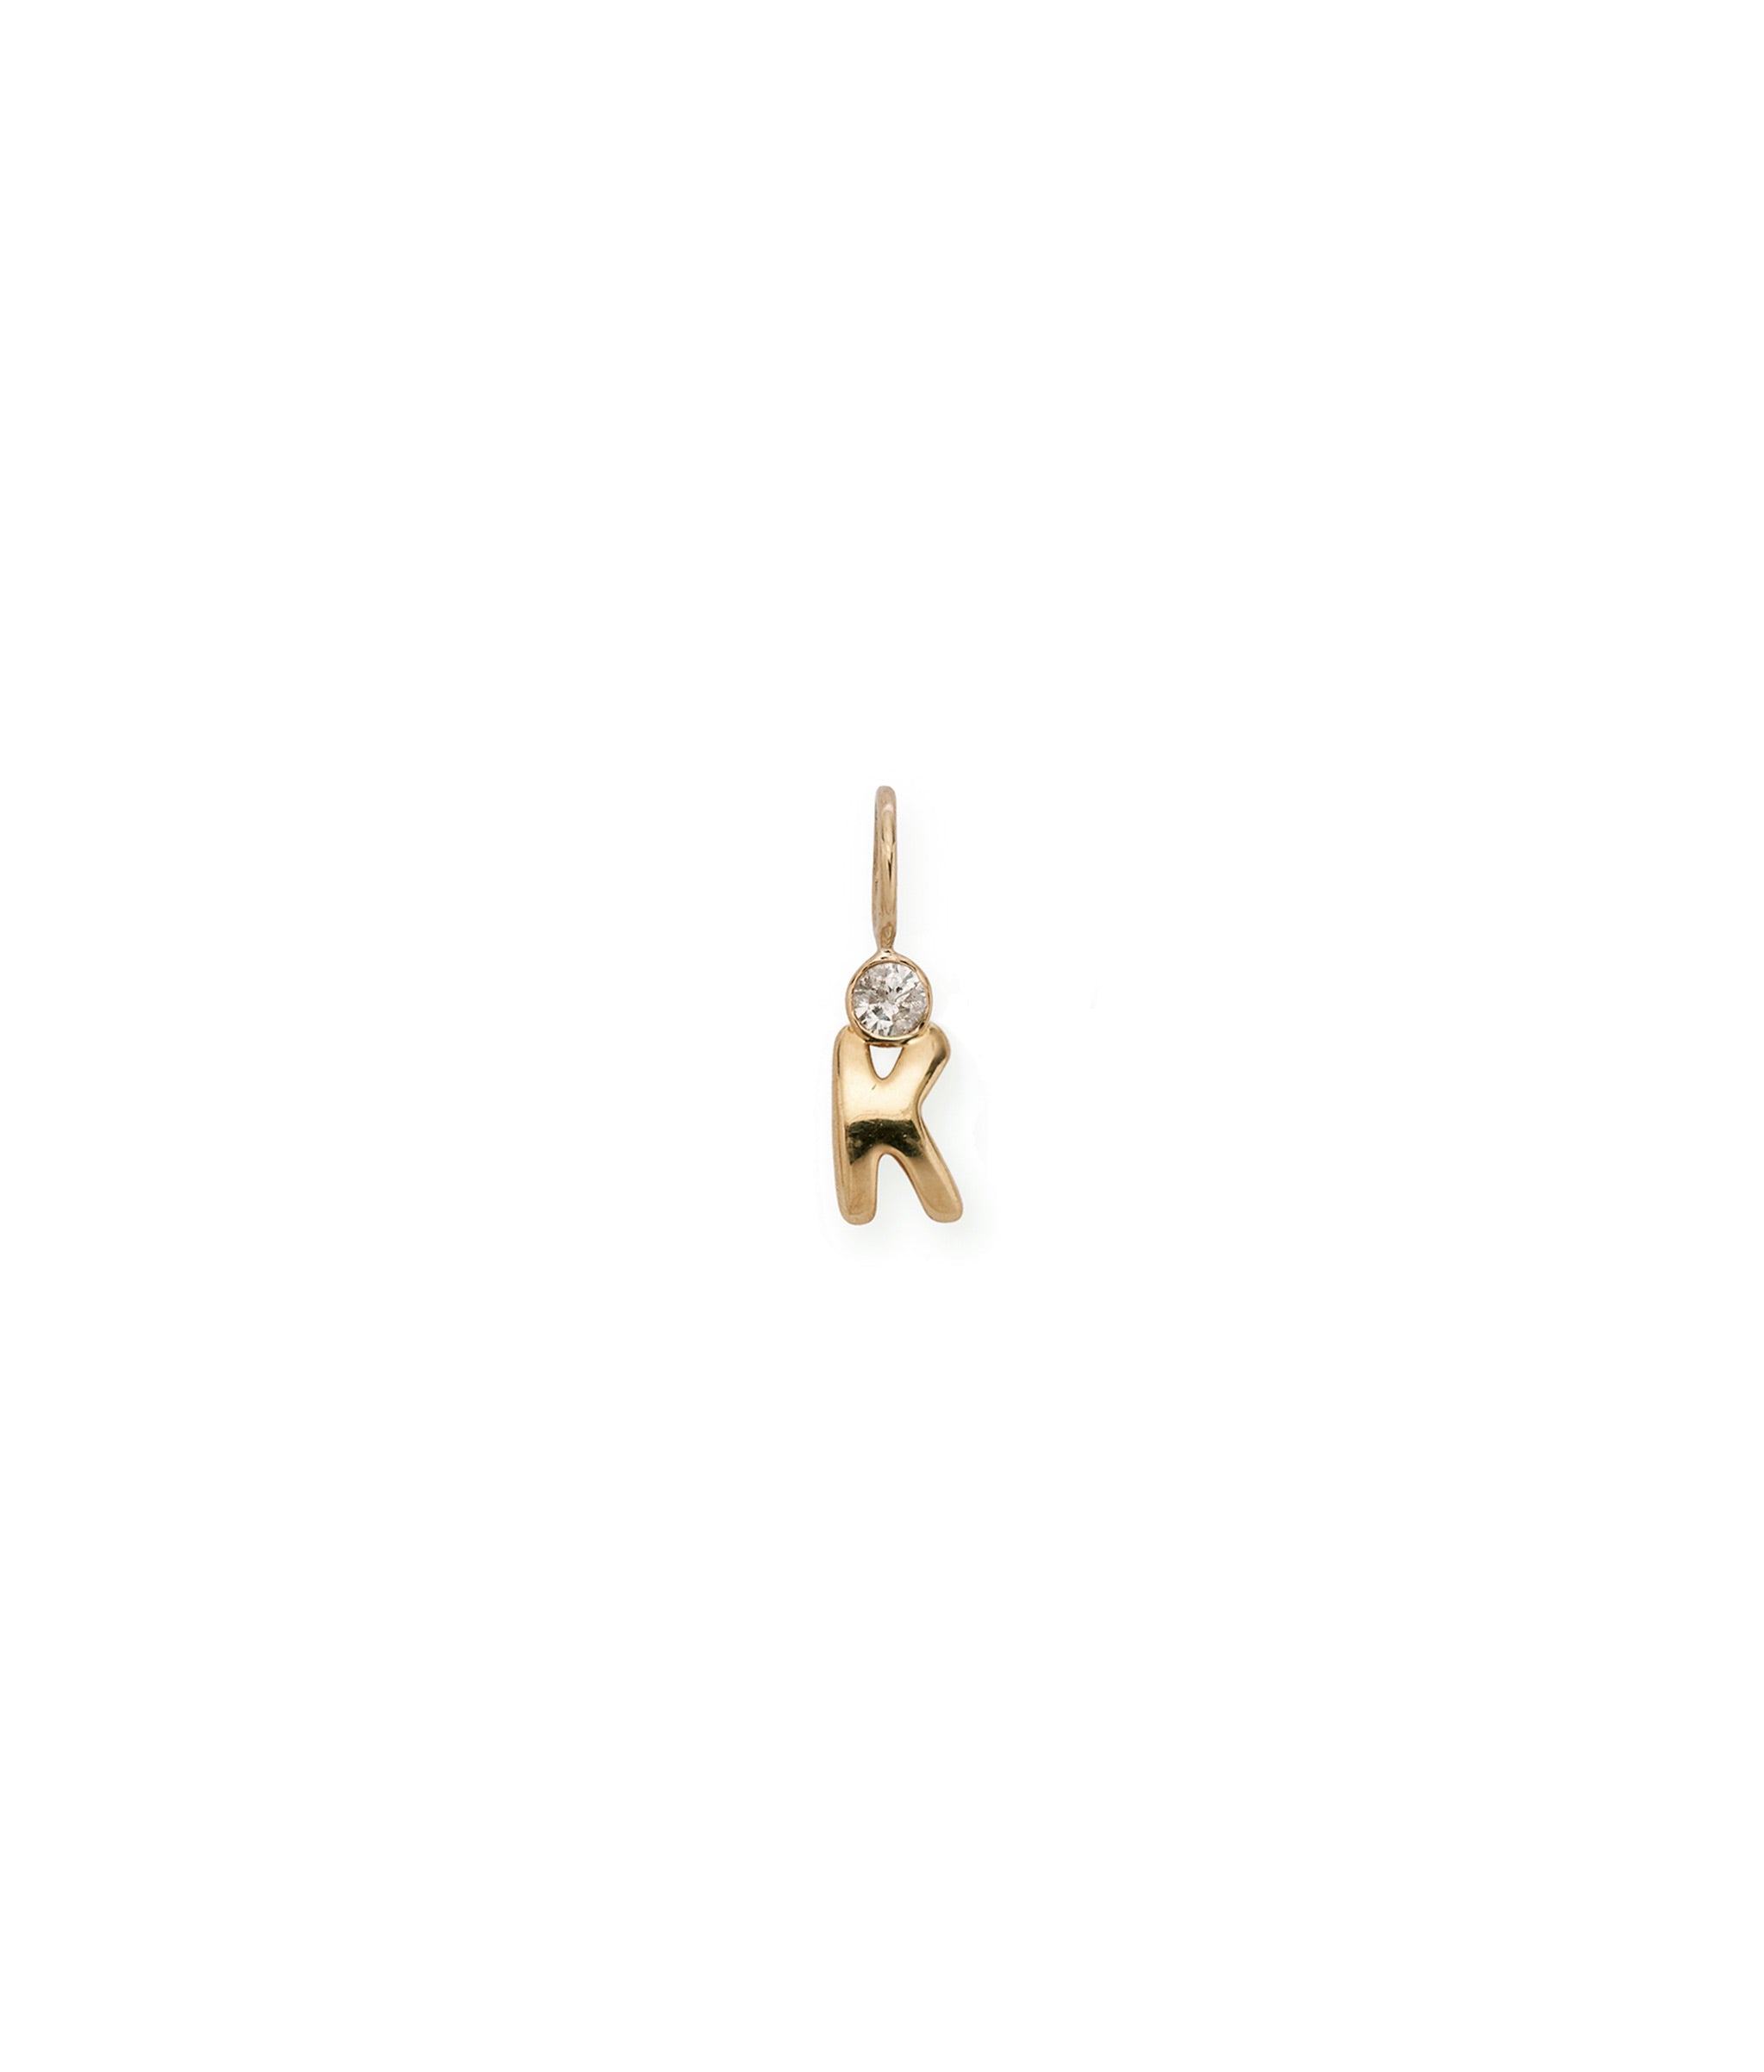 Alphabet Soup "K" Charm. Puffy mini 14k gold letter "K" charm with round diamond accent.